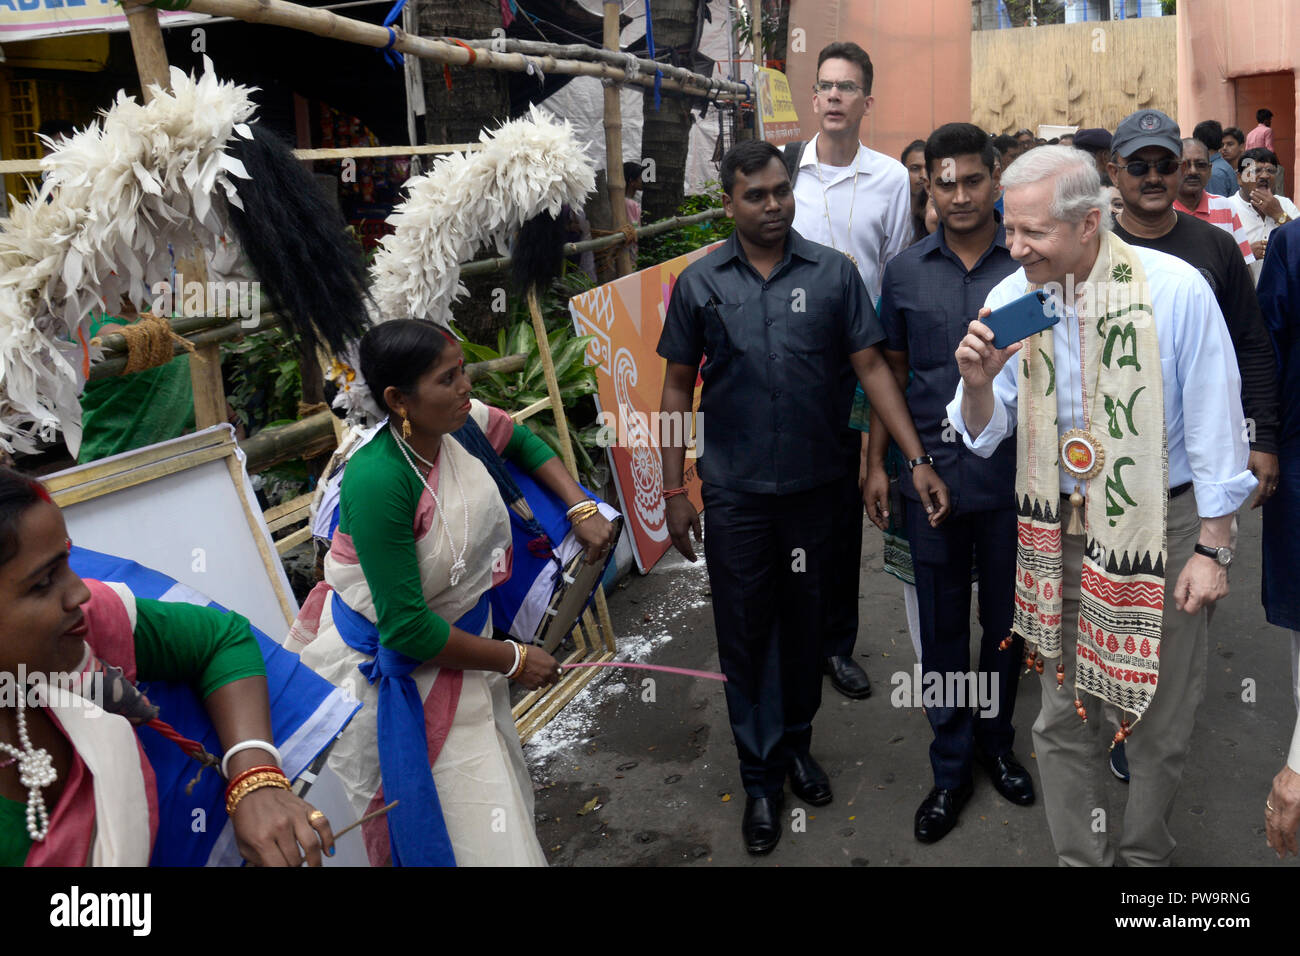 Kolkata, India. 13th Oct, 2018. U.S. Ambassador to India Kenneth I. Juster (right) visit to the pandel or temporary platform decorated with jute products to promote the Jute Industry at Tridhara Sammilani Durga Puja festival during his visit to Kolkata on the occasion of Durga Puja Festival. Credit: Saikat Paul/Pacific Press/Alamy Live News Stock Photo